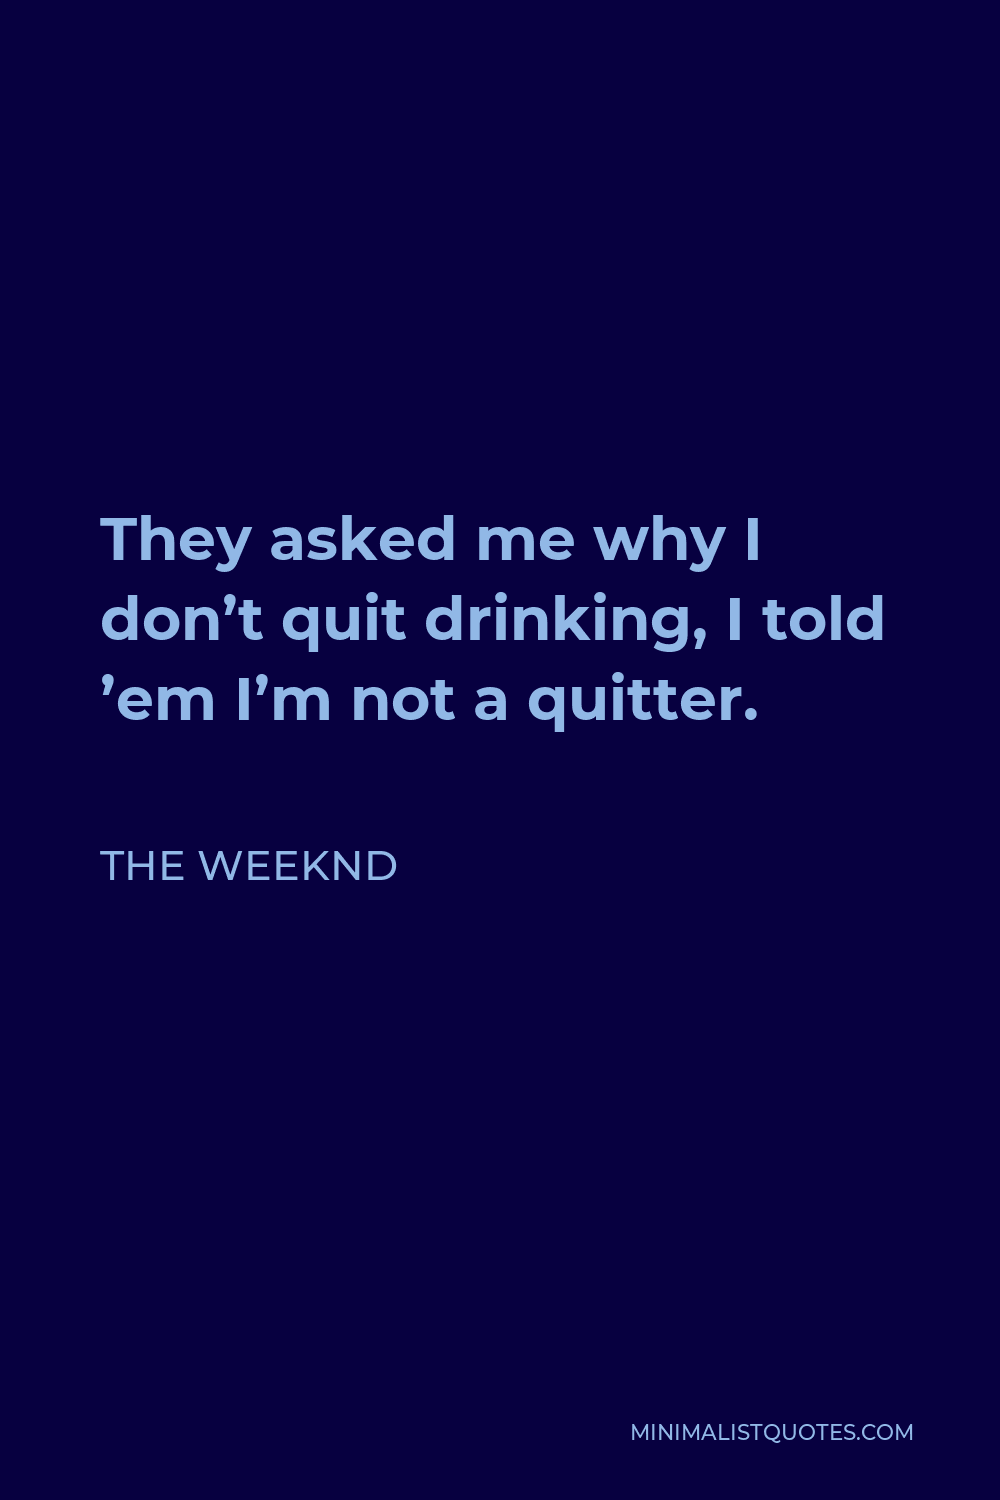 The Weeknd Quote - They asked me why I don’t quit drinking, I told ’em I’m not a quitter.